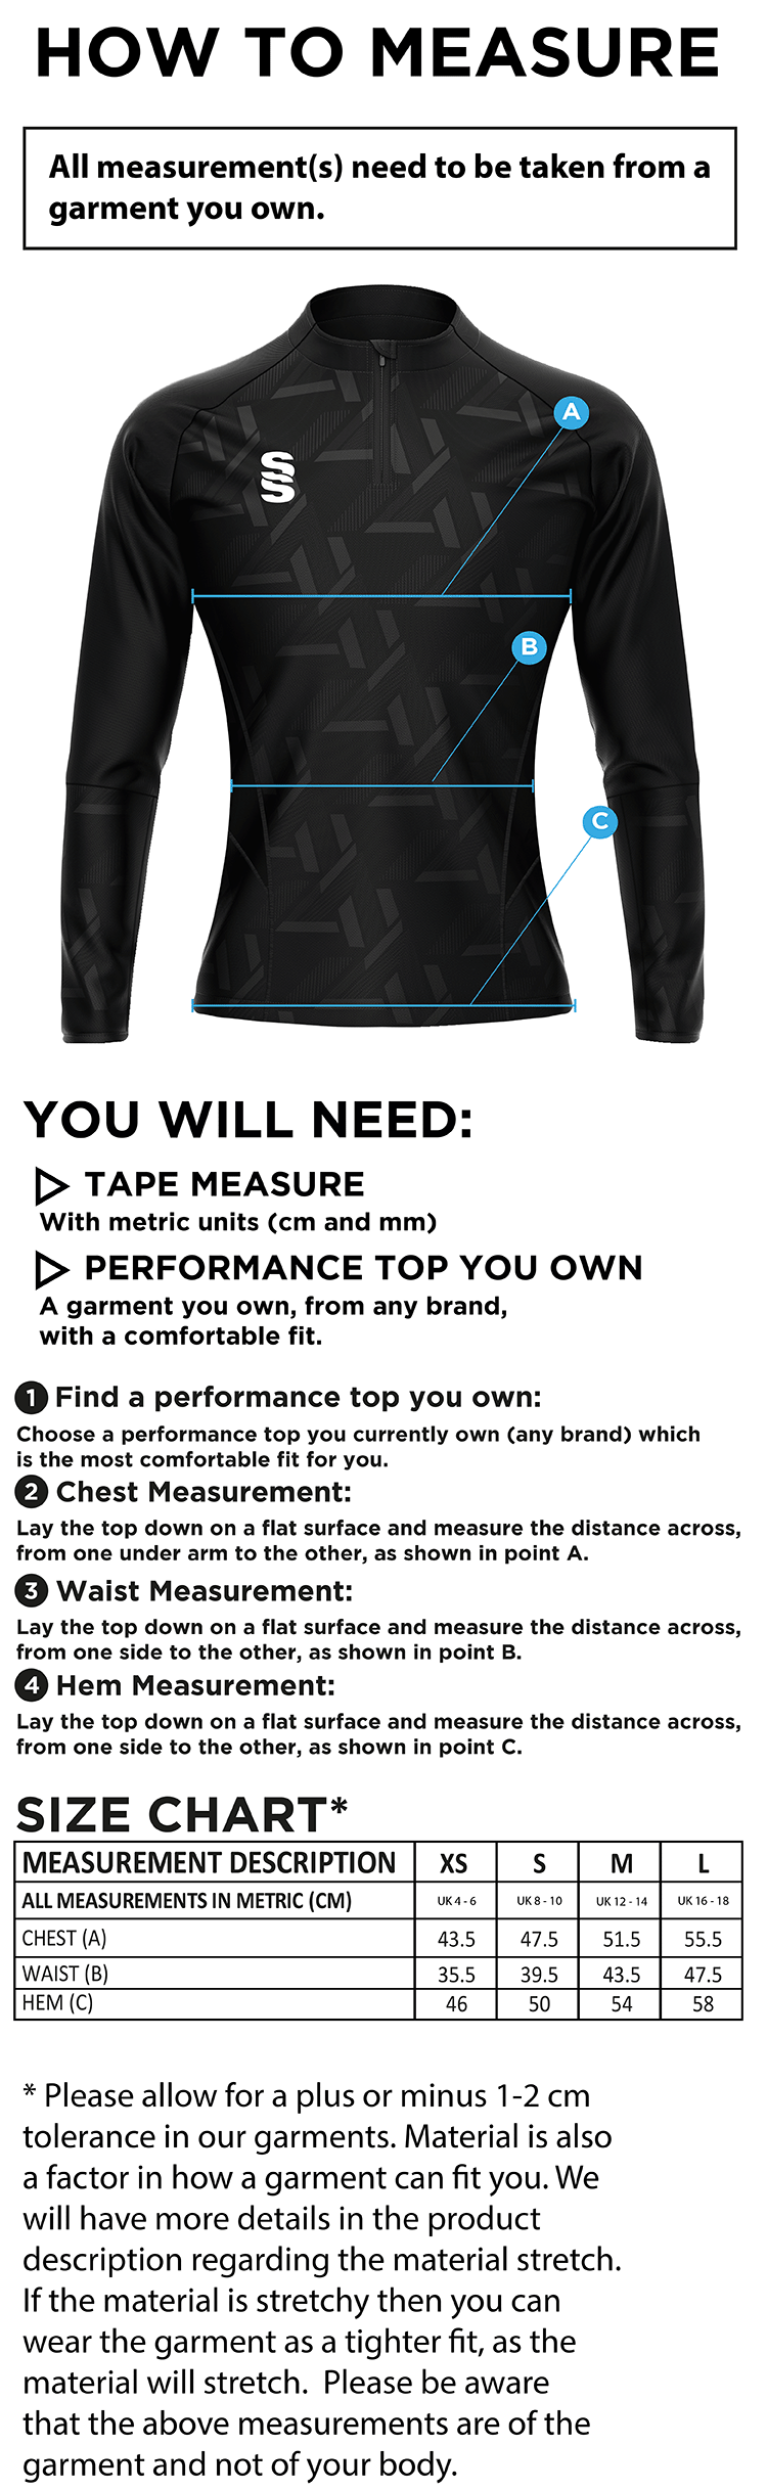 Impact 1/4 Zip Performance Top - Women's Fit : Black - Size Guide